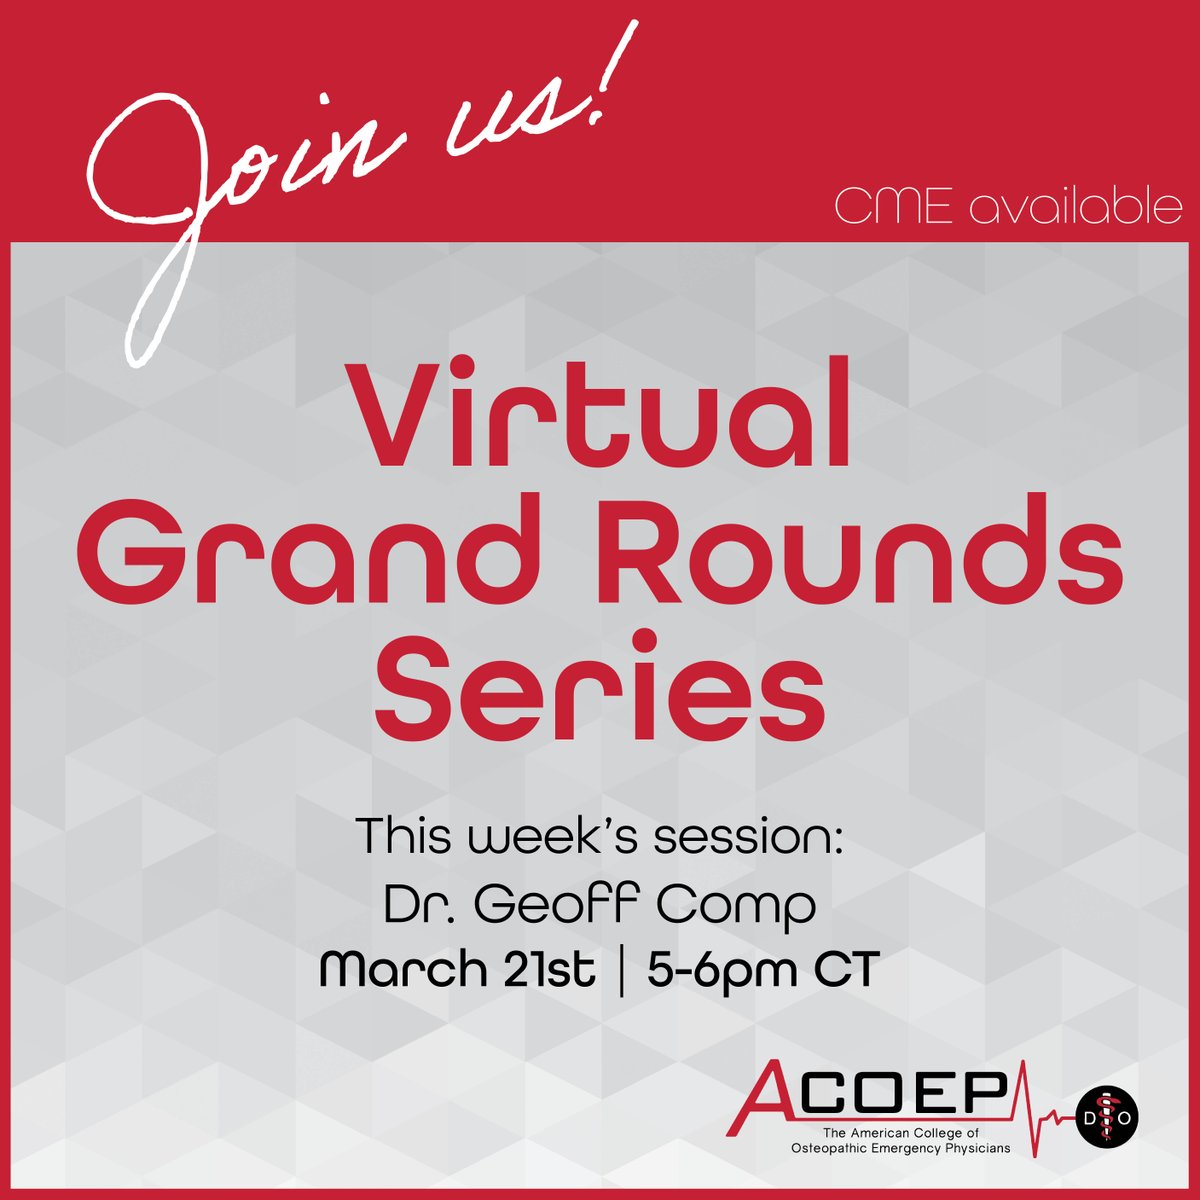 Dr. Comp will be joining us for our next Virtual Grand Rounds webinar Thursday, Mar 21st at 5 pm CT. We hope you can join us! ow.ly/xjlW50PSzBm